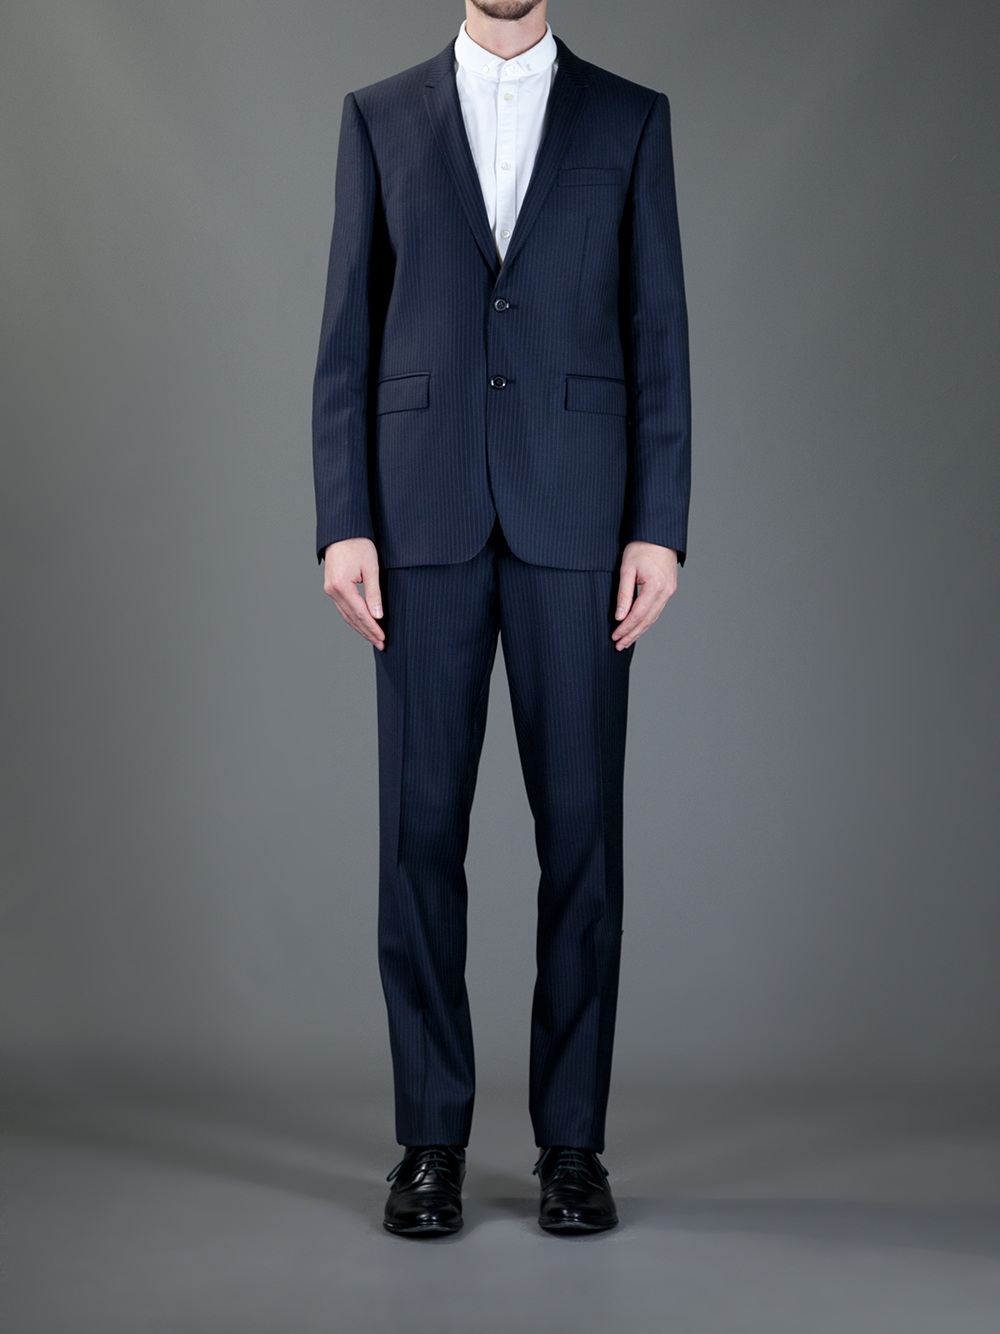 Lyst - Burberry Pin Stripe Suit in Blue for Men